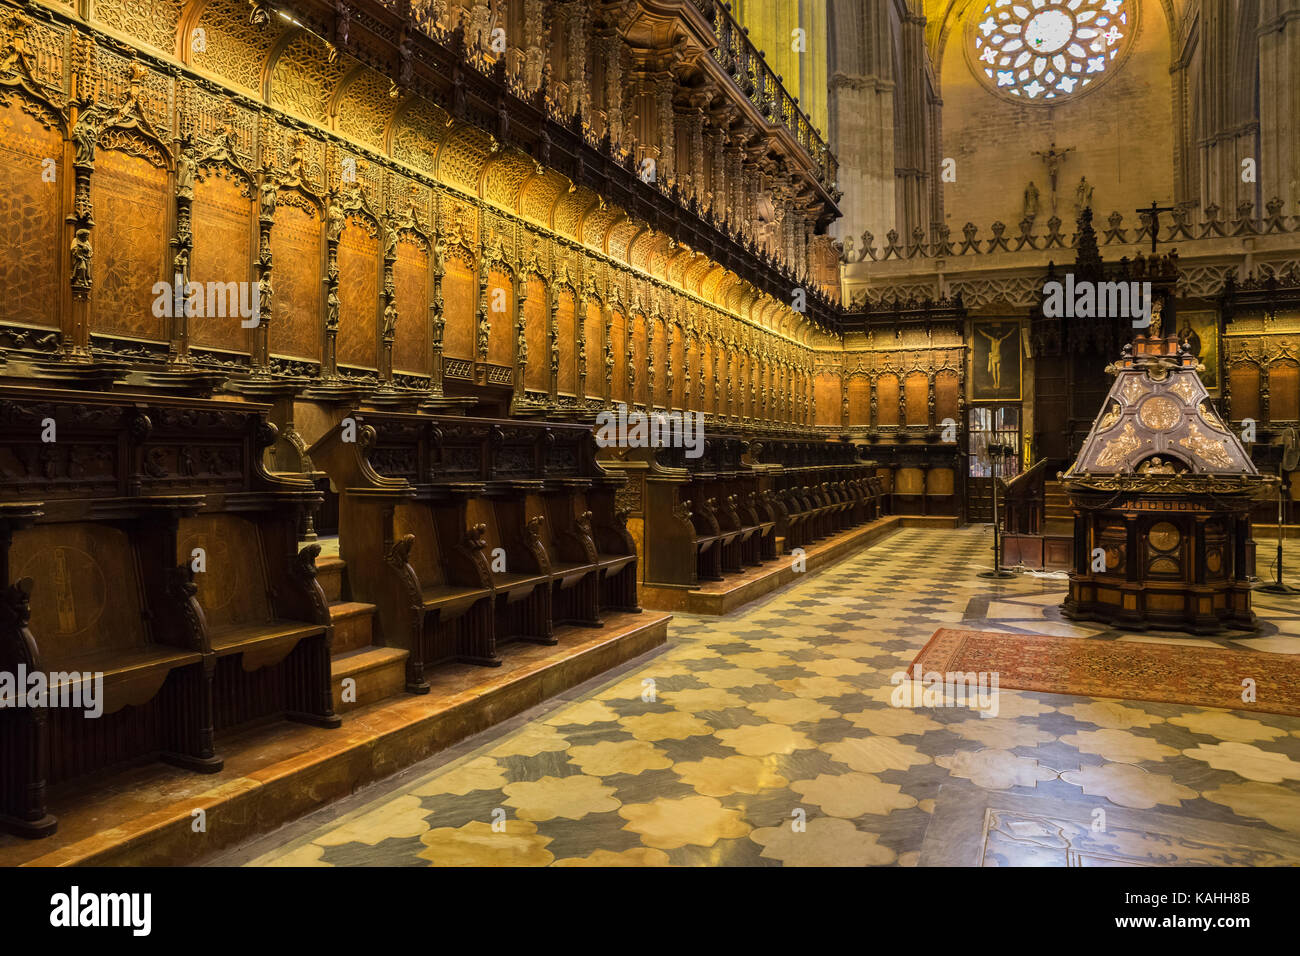 Choir with chairs, Coro, Cathedral of Santa María de la Sede, UNESCO World Heritage Site, Seville, Seville, Province of Seville Stock Photo